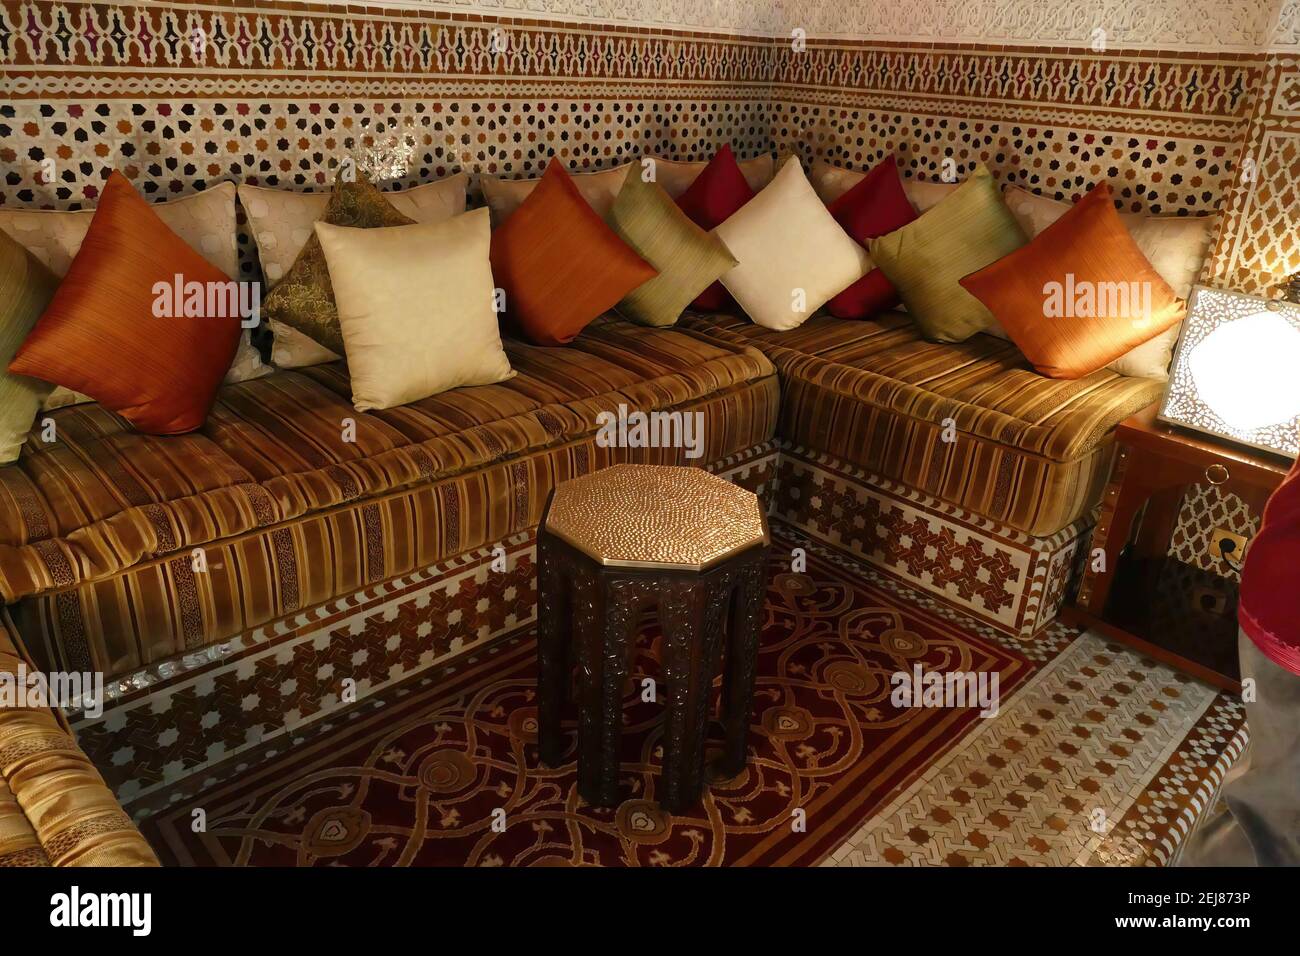 Moroccan Style Sofa With Many Pillows In A Roo 2EJ873P 